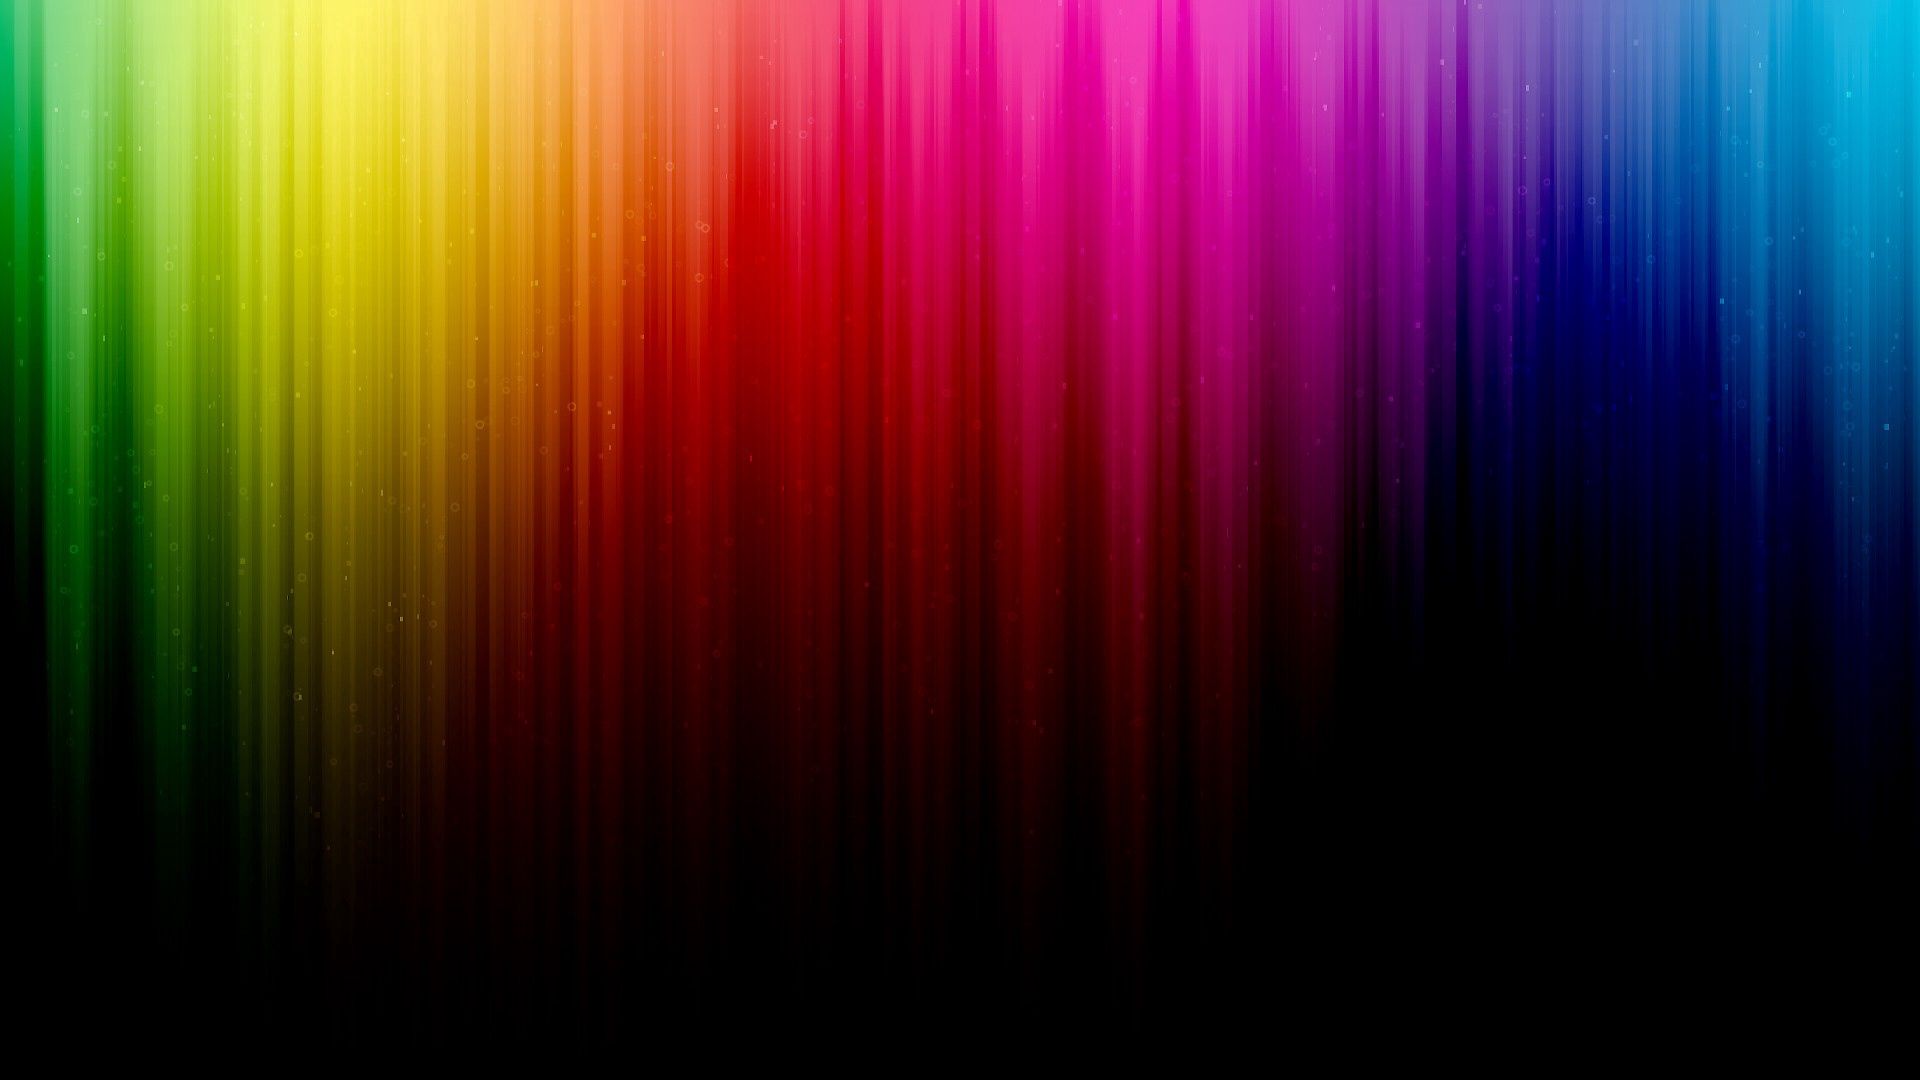 streaks, abstract, background, rainbow, lines, shadow, stripes, iridescent, vertical